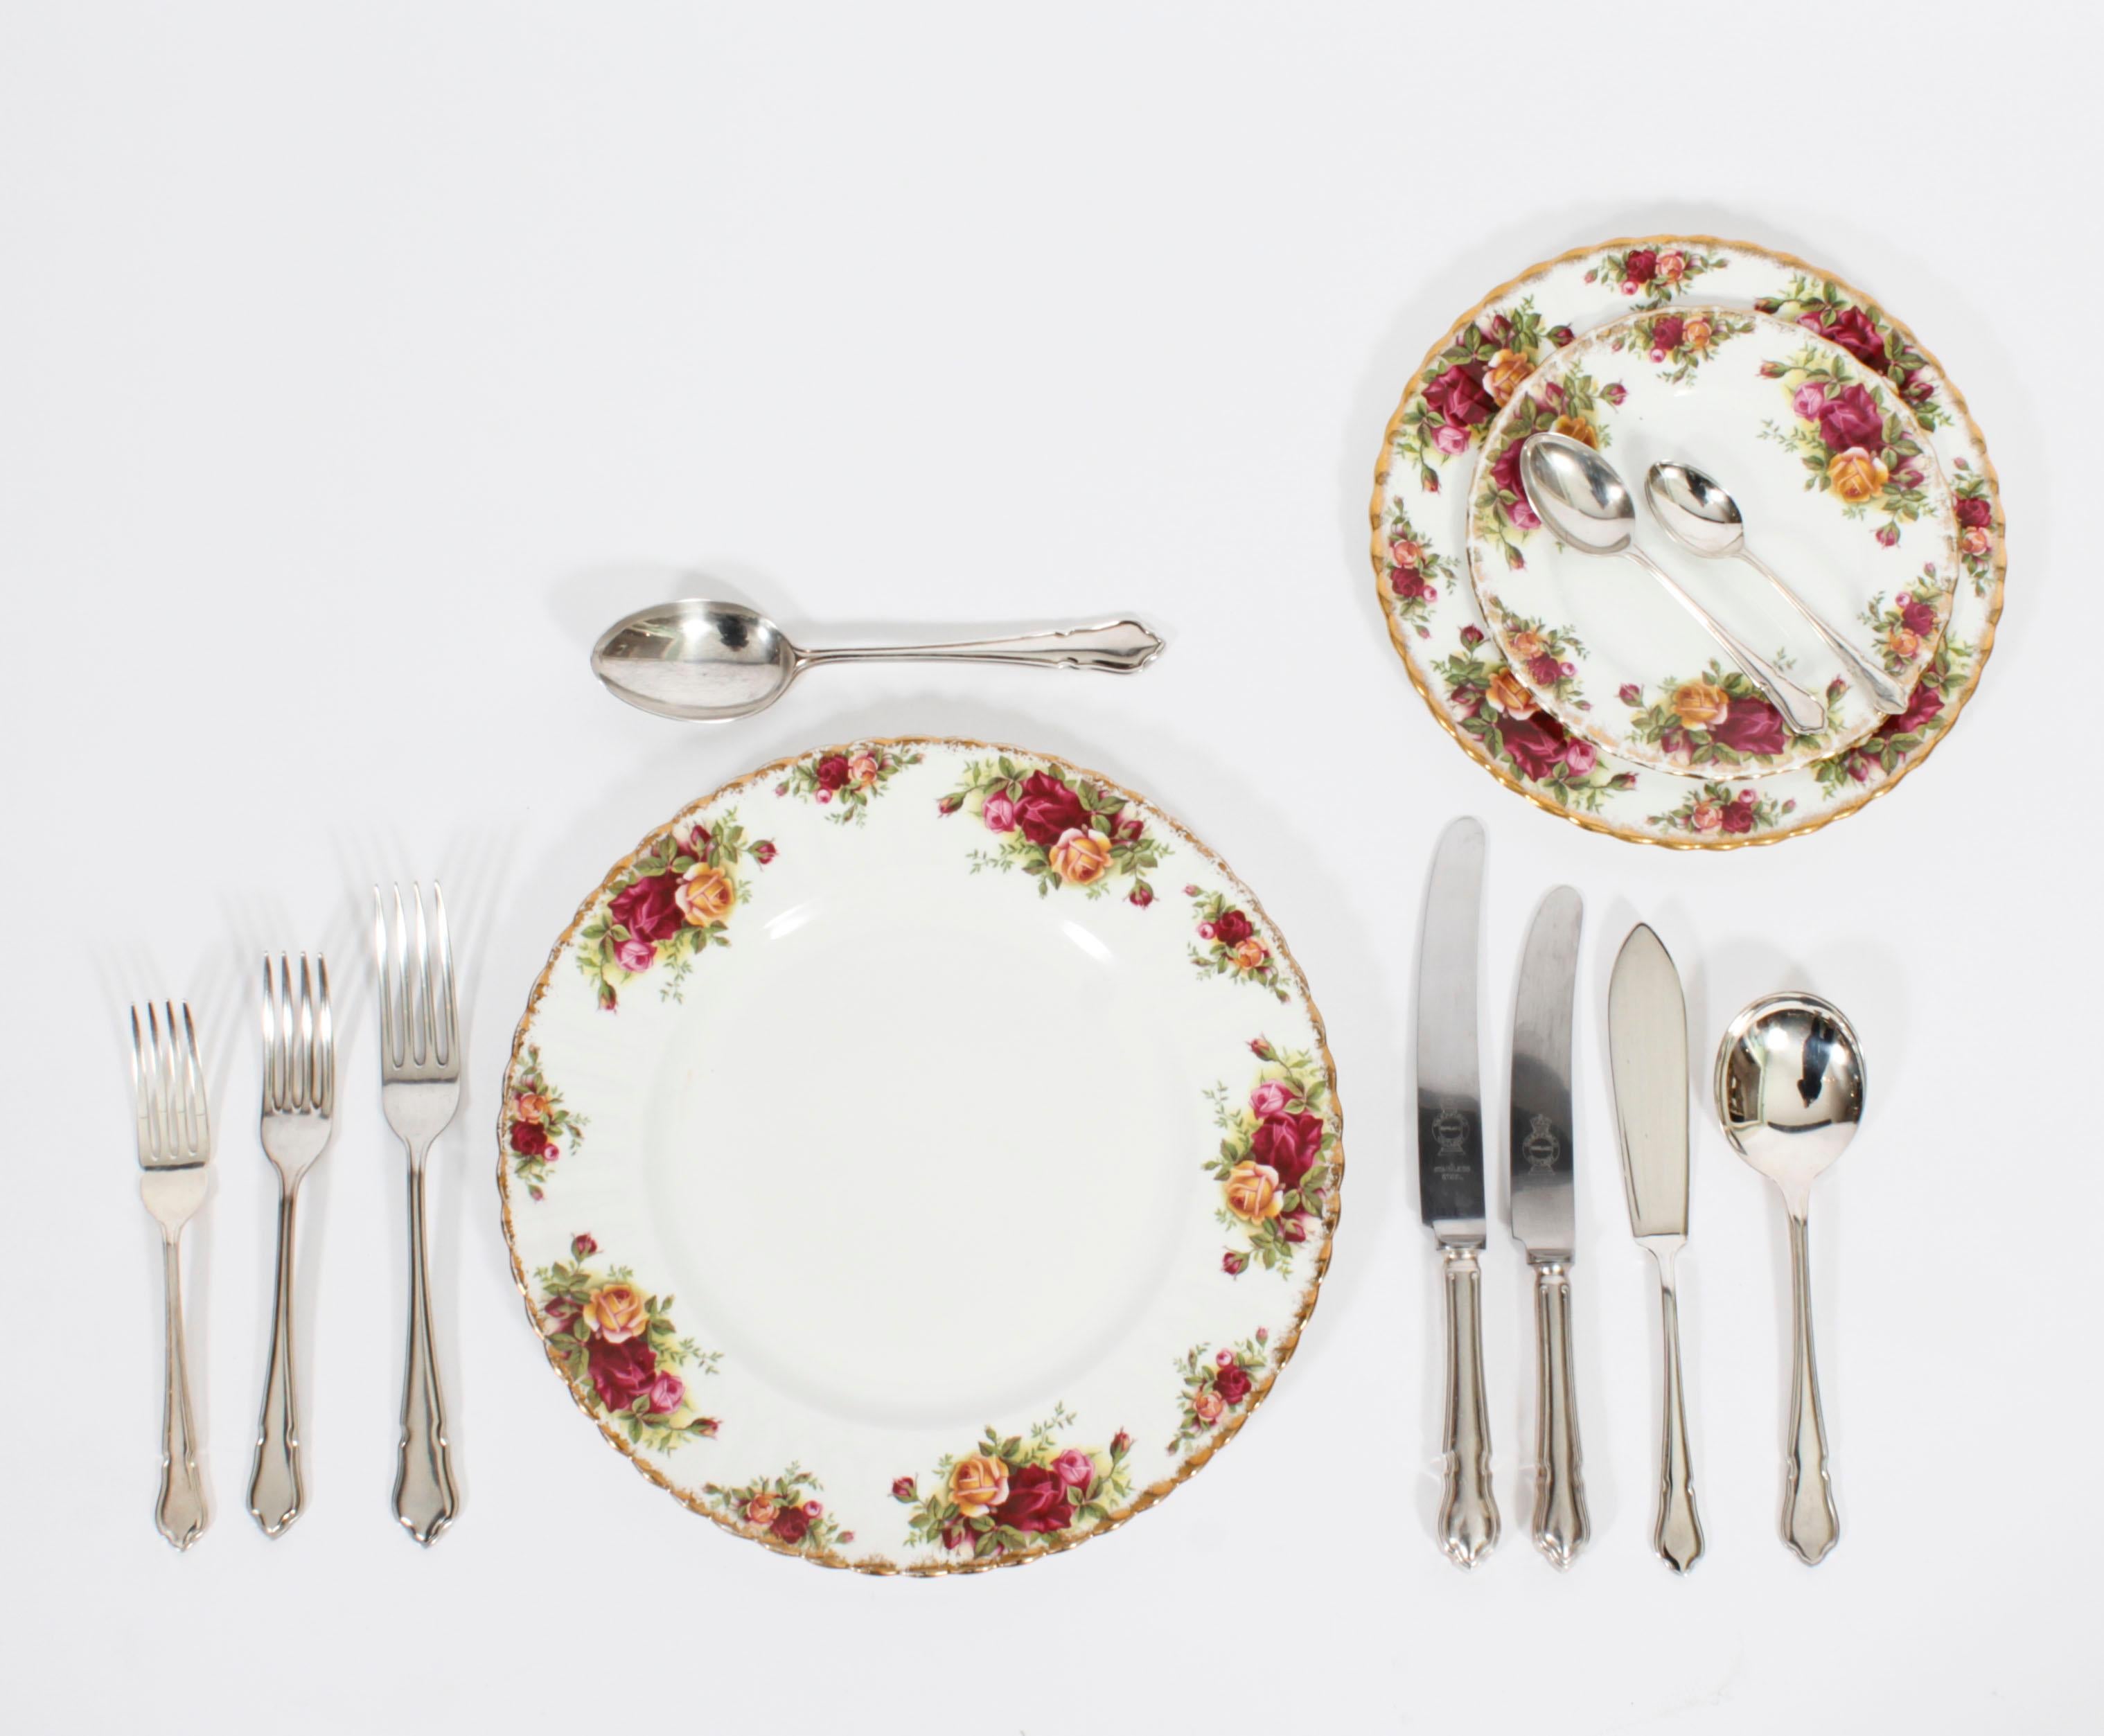 This is a stunning vintage 12 place setting A1 Sheffield England, silver plated cutlery set by the renowned Sheffield silversmith John Turton, dating from the mid 20th century.
 
The beautiful set consists of 125 pieces in the Dubarry pattern.
